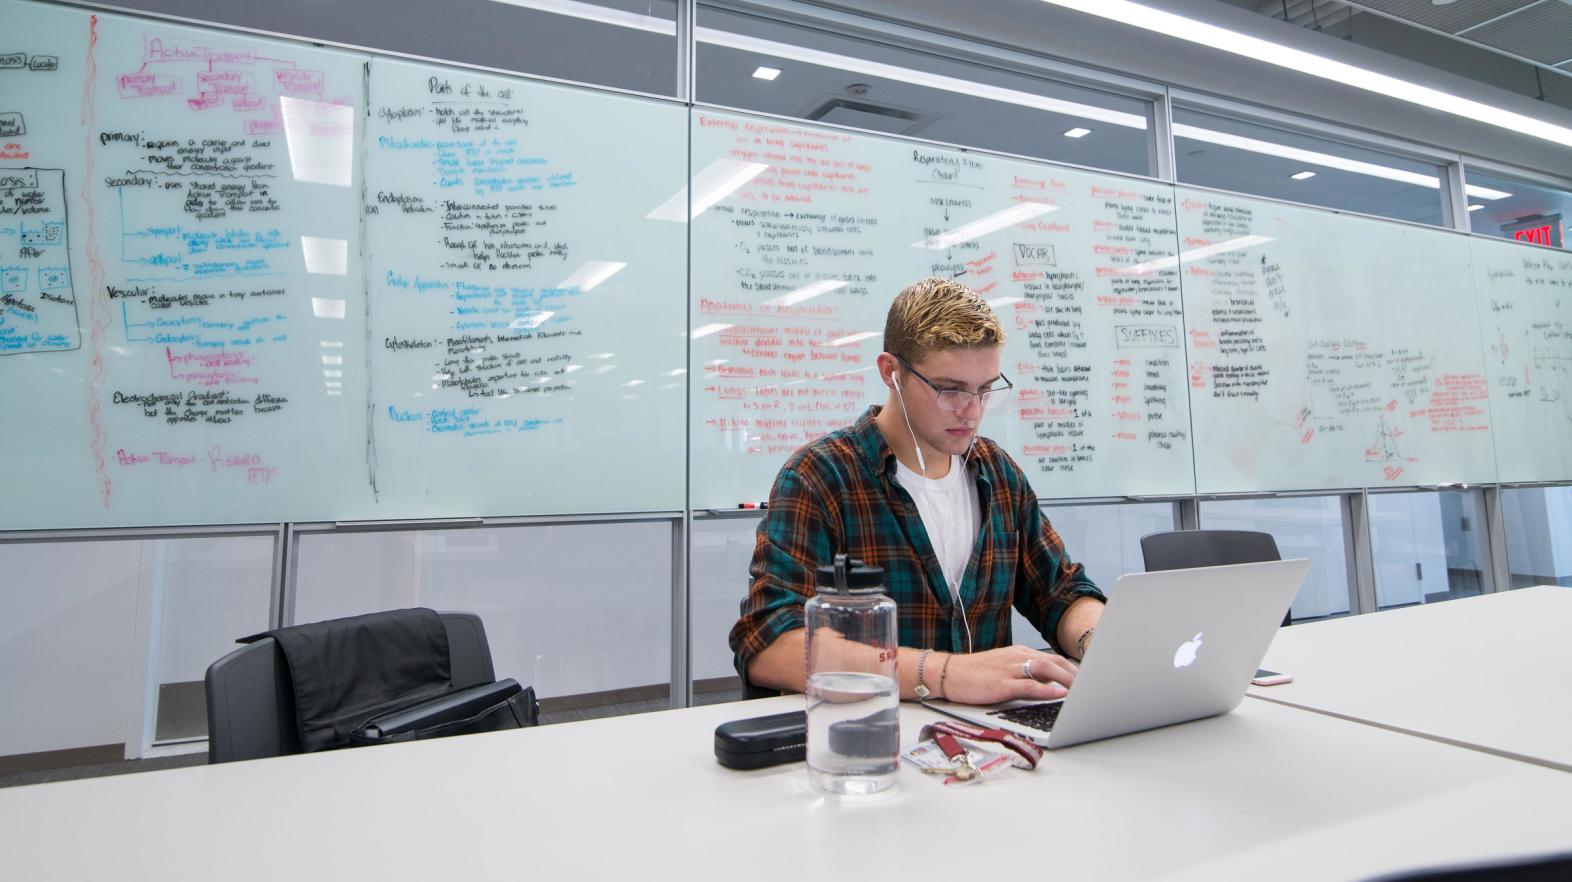 A male student types on his laptop as he sits in front of a white board with notes written on it.